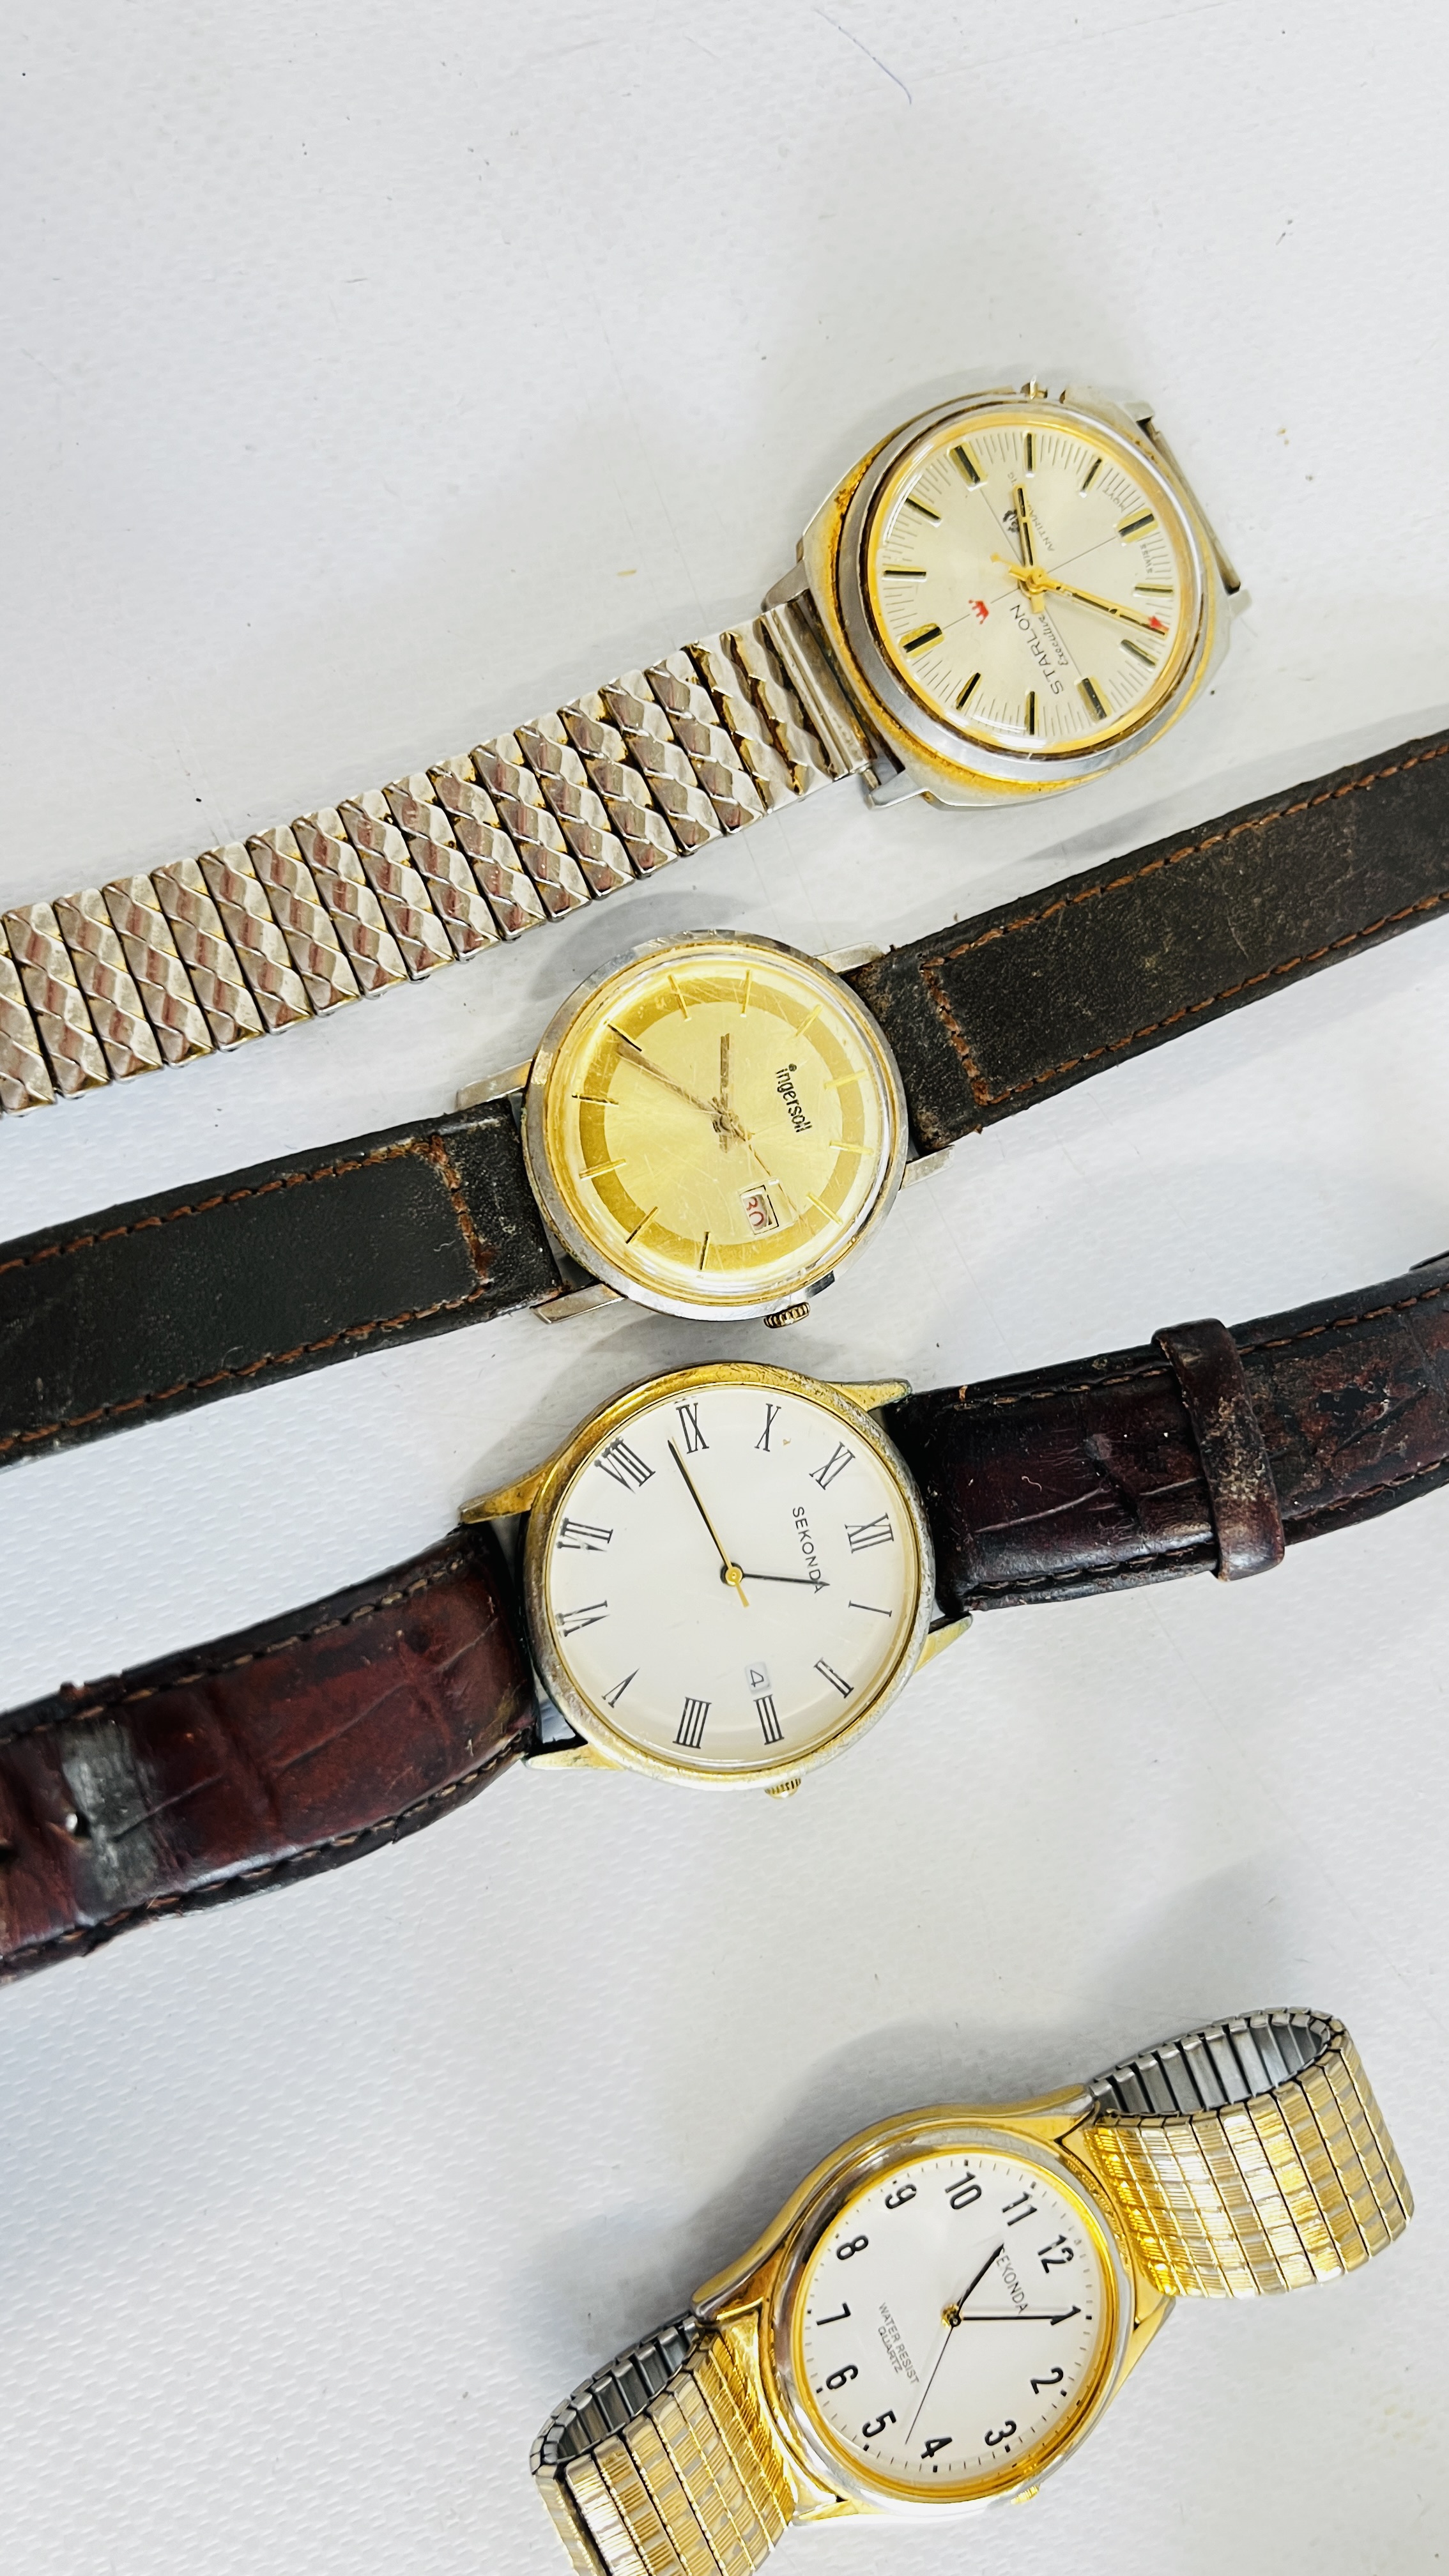 GROUP OF 17 GENT'S WRIST WATCHES TO INCLUDE SEIKO, SEKONDA, CITIZEN ECO DRIVE ETC. - Image 2 of 4